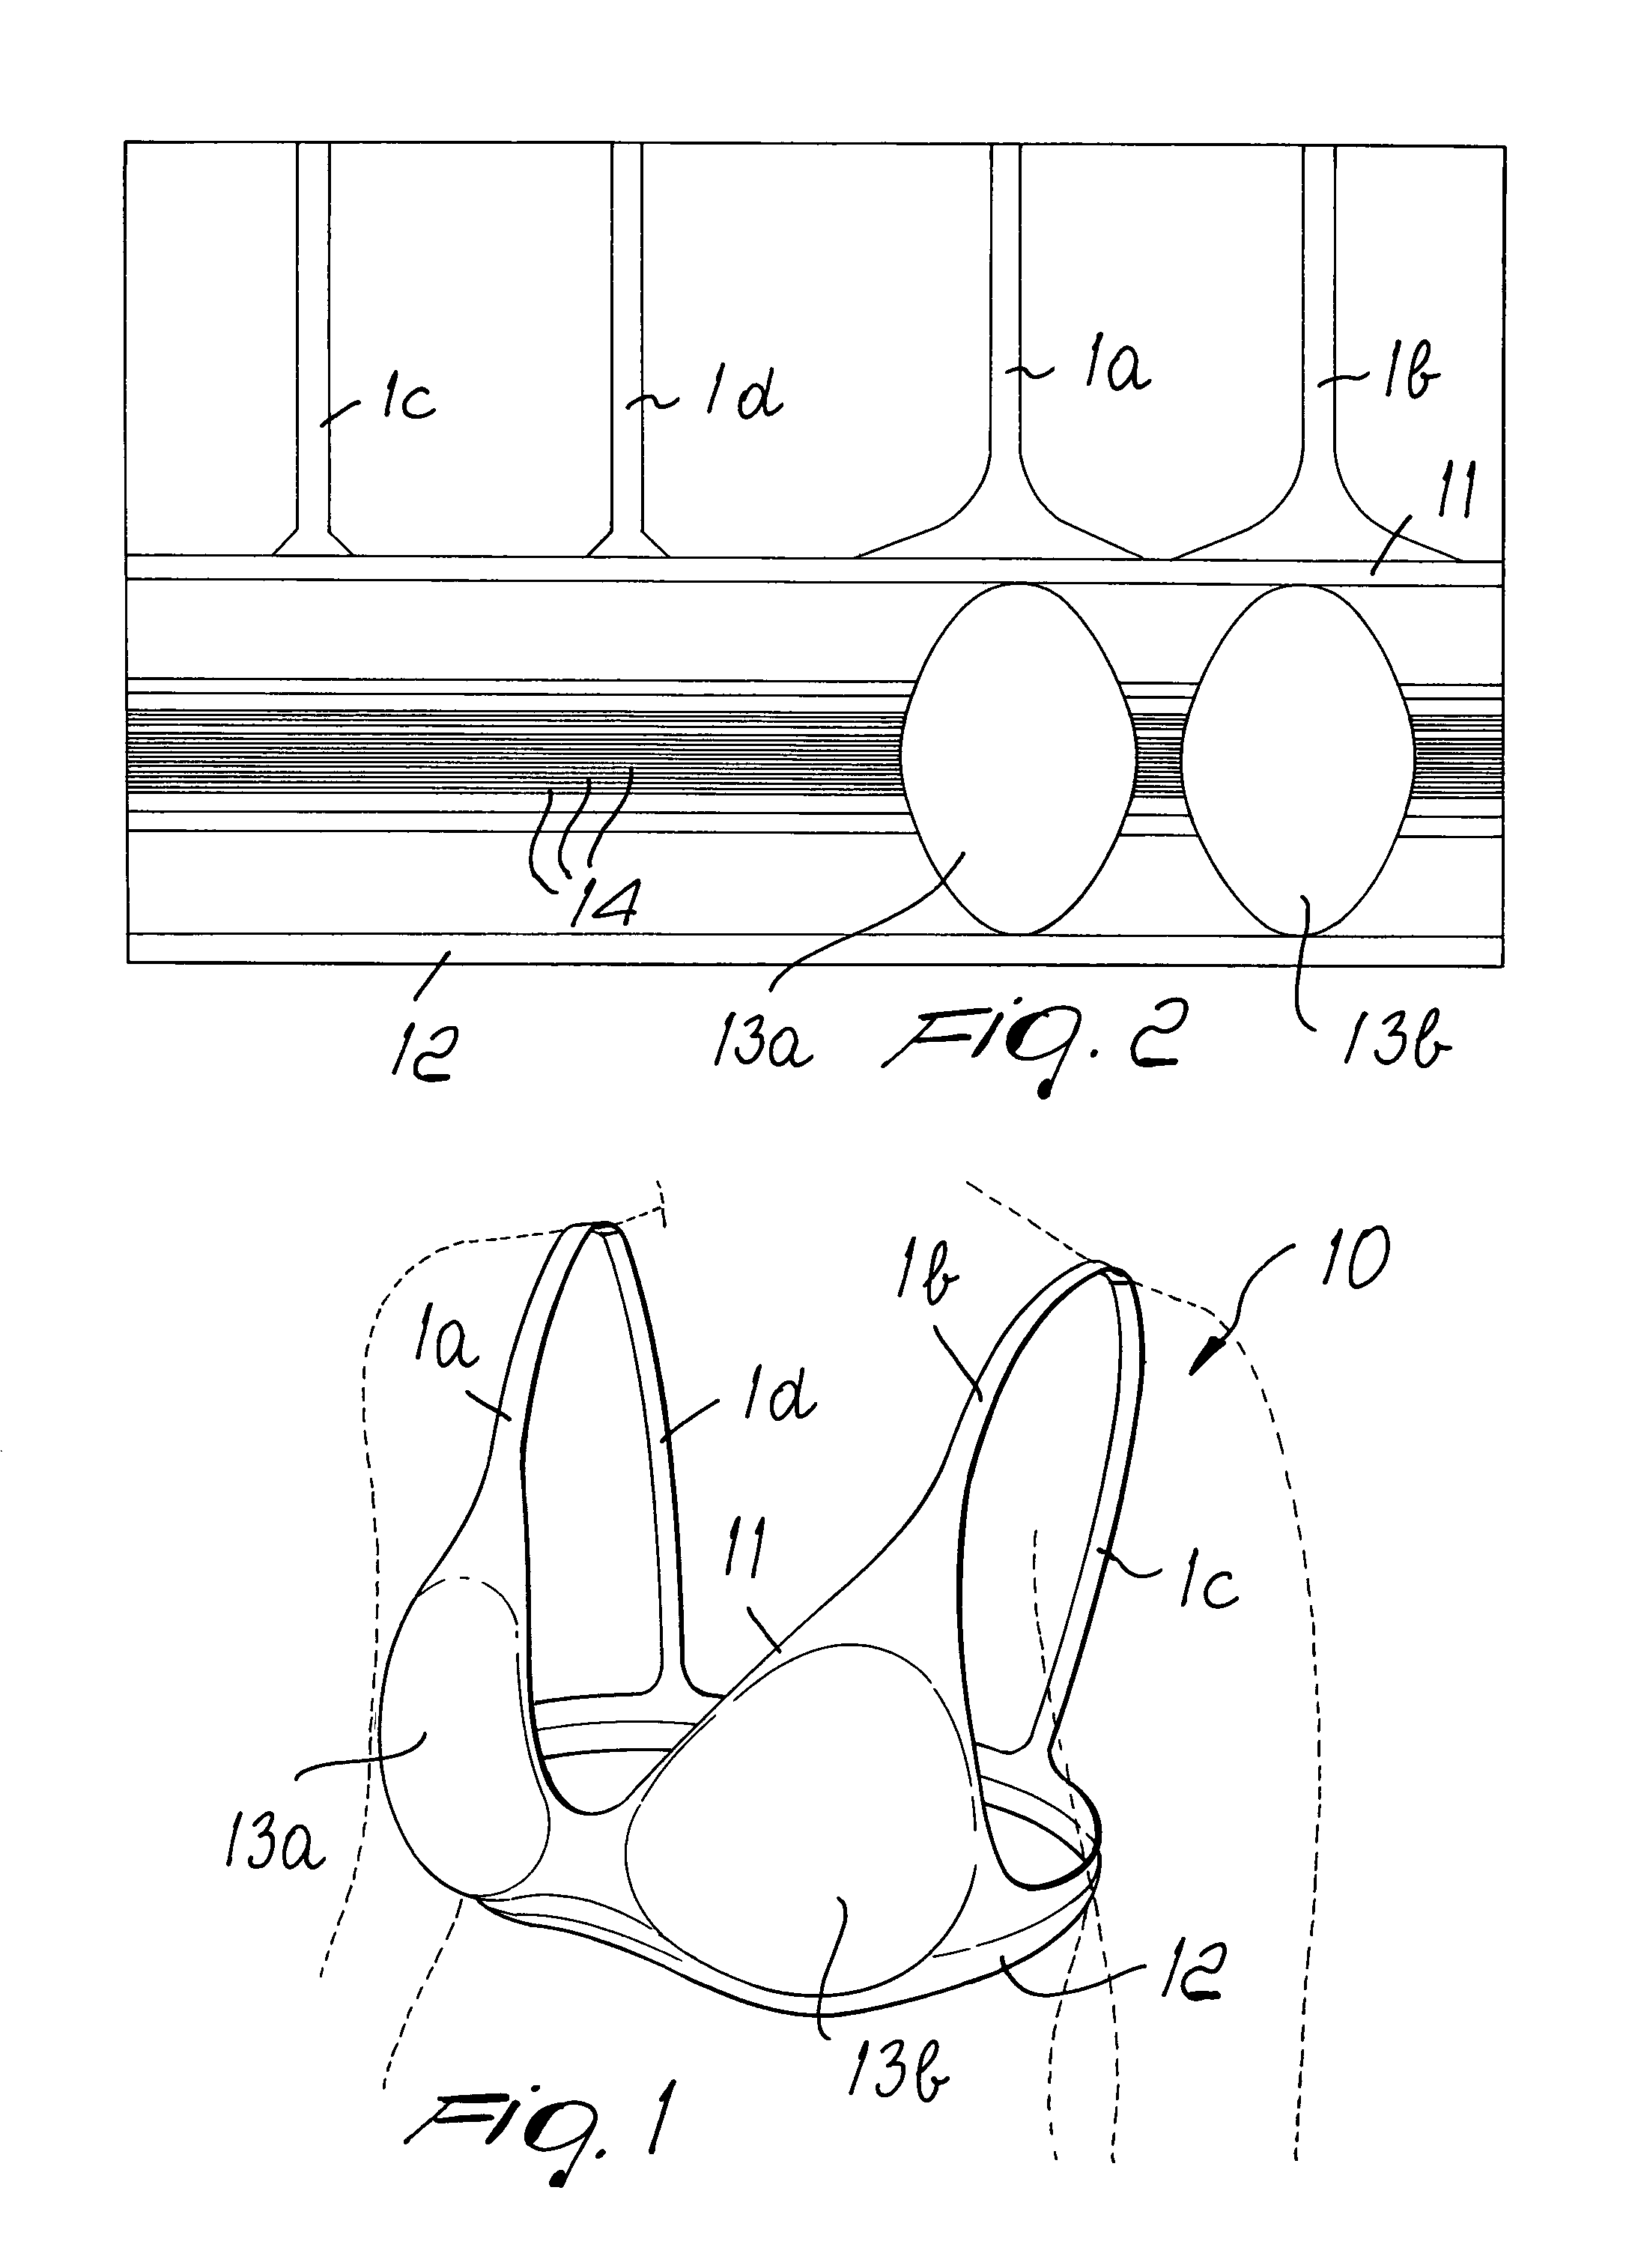 Method for manufacturing knitted articles with a circular knitting machine for forming items of clothing without lateral seams